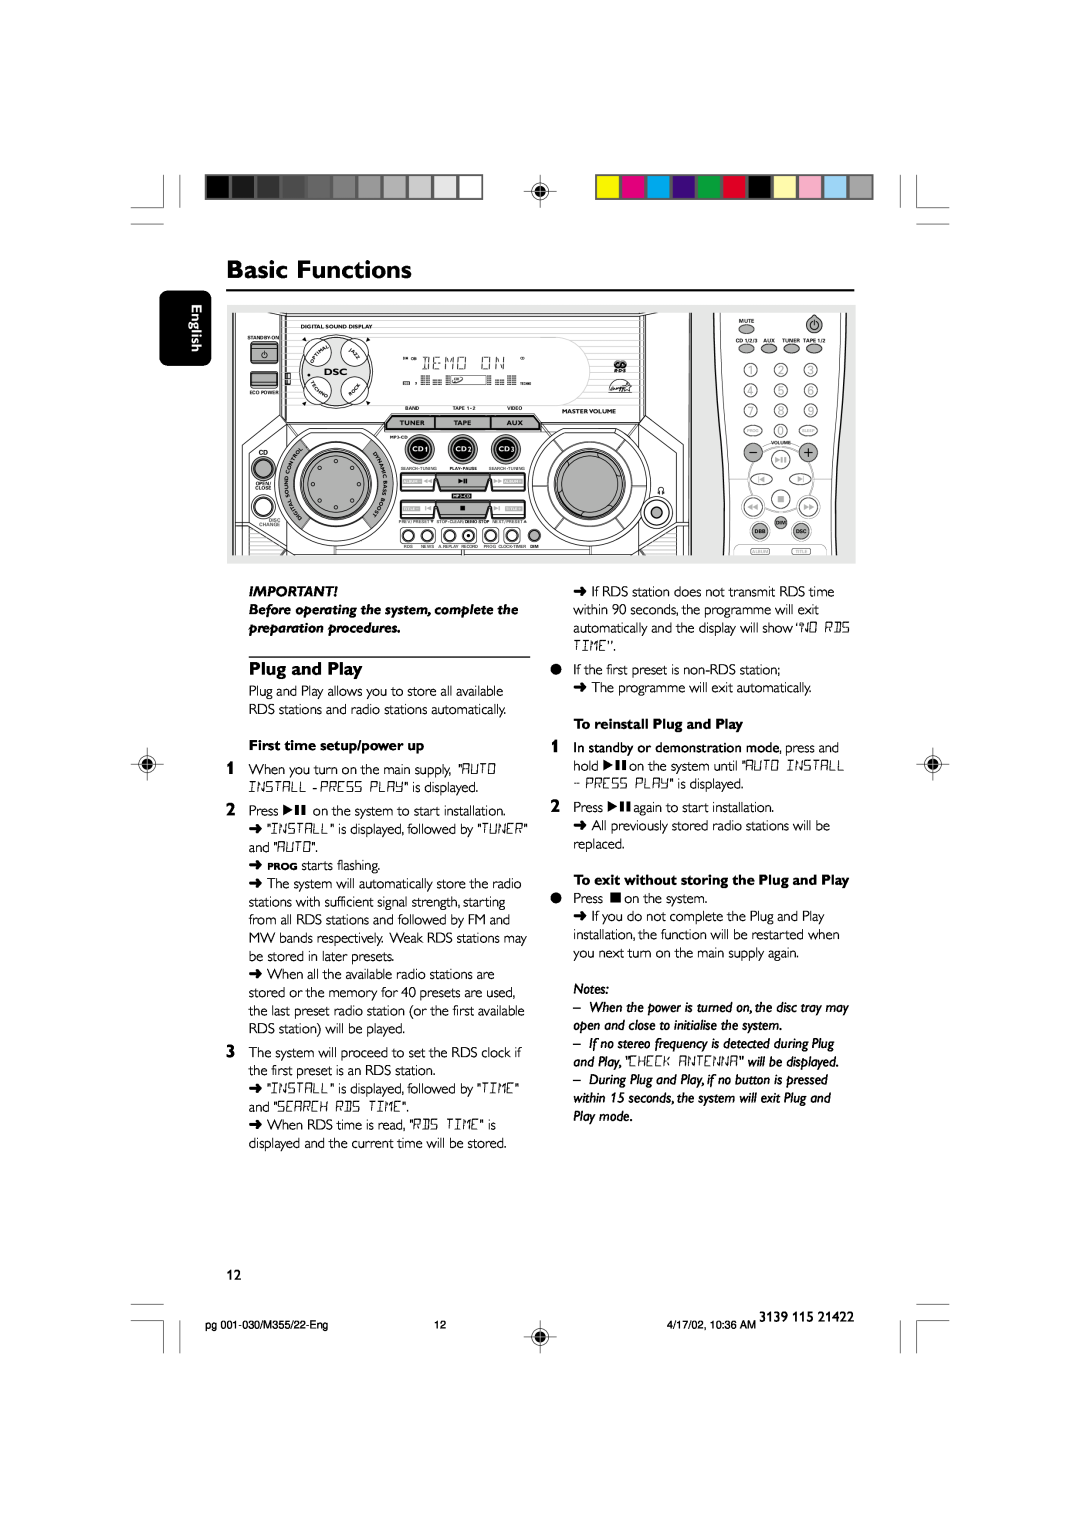 Philips FW-M355 manual Basic Functions, First time setup/power up, To reinstall Plug and Play, English 